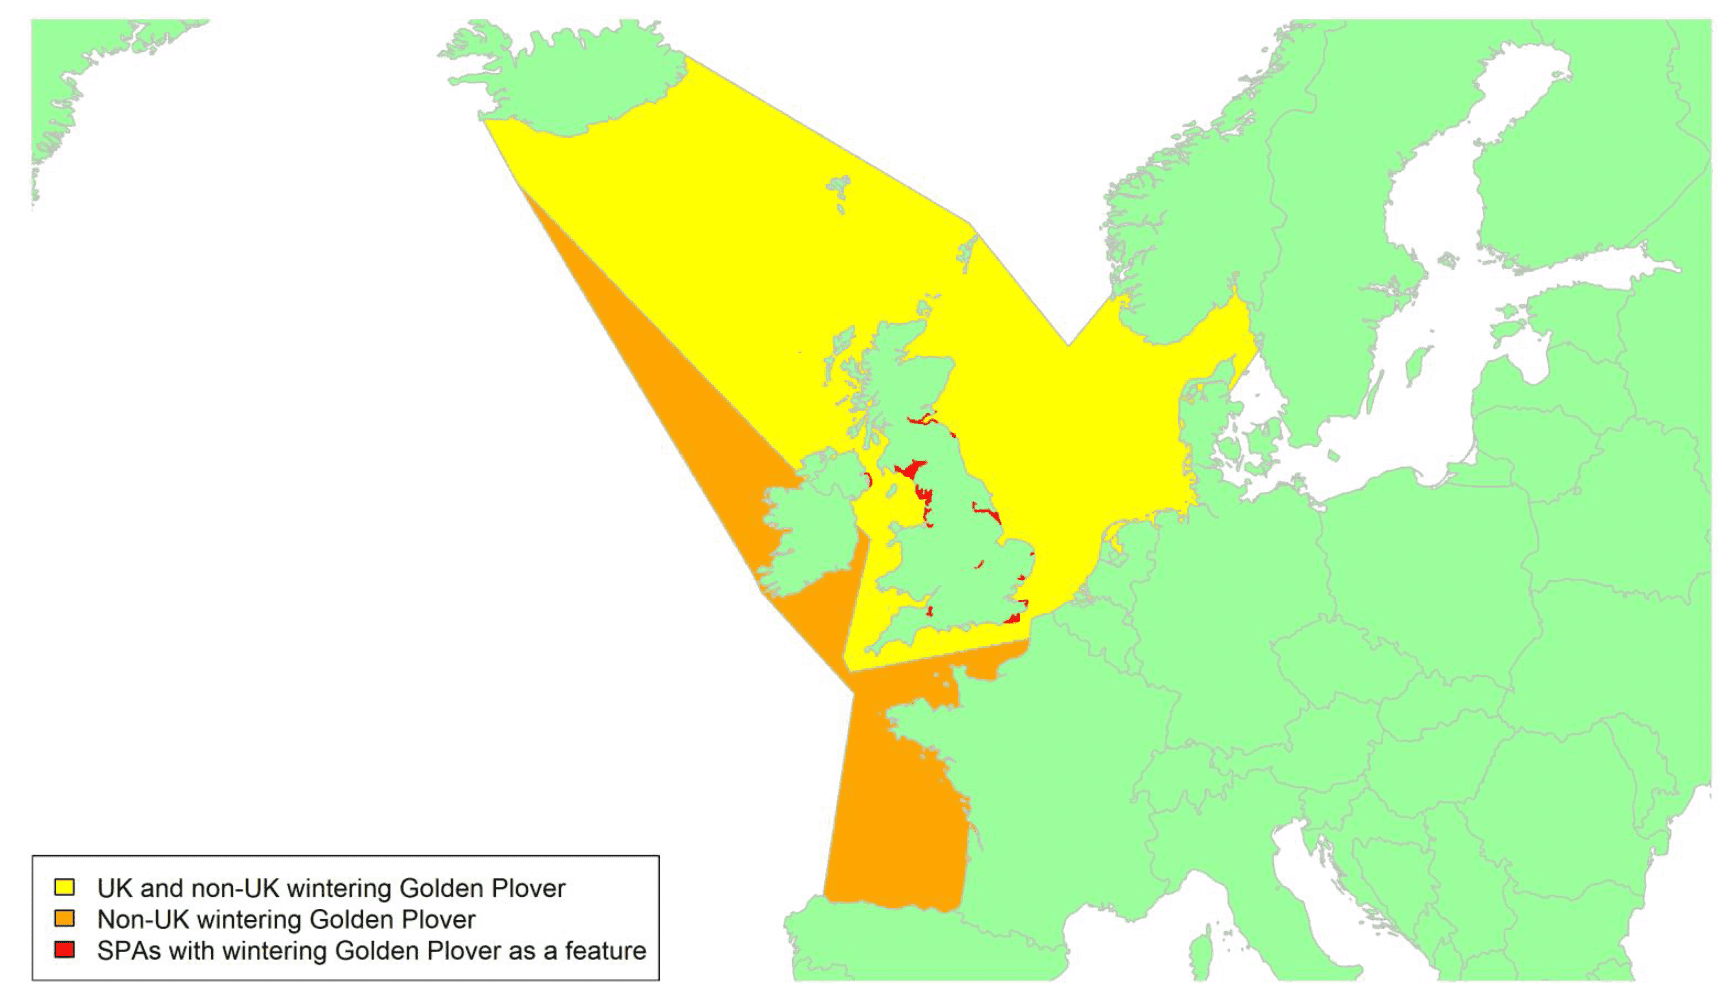 Map of North West Europe showing migratory routes and SPAs within the UK for wintering Golden Plover as described in the text below.